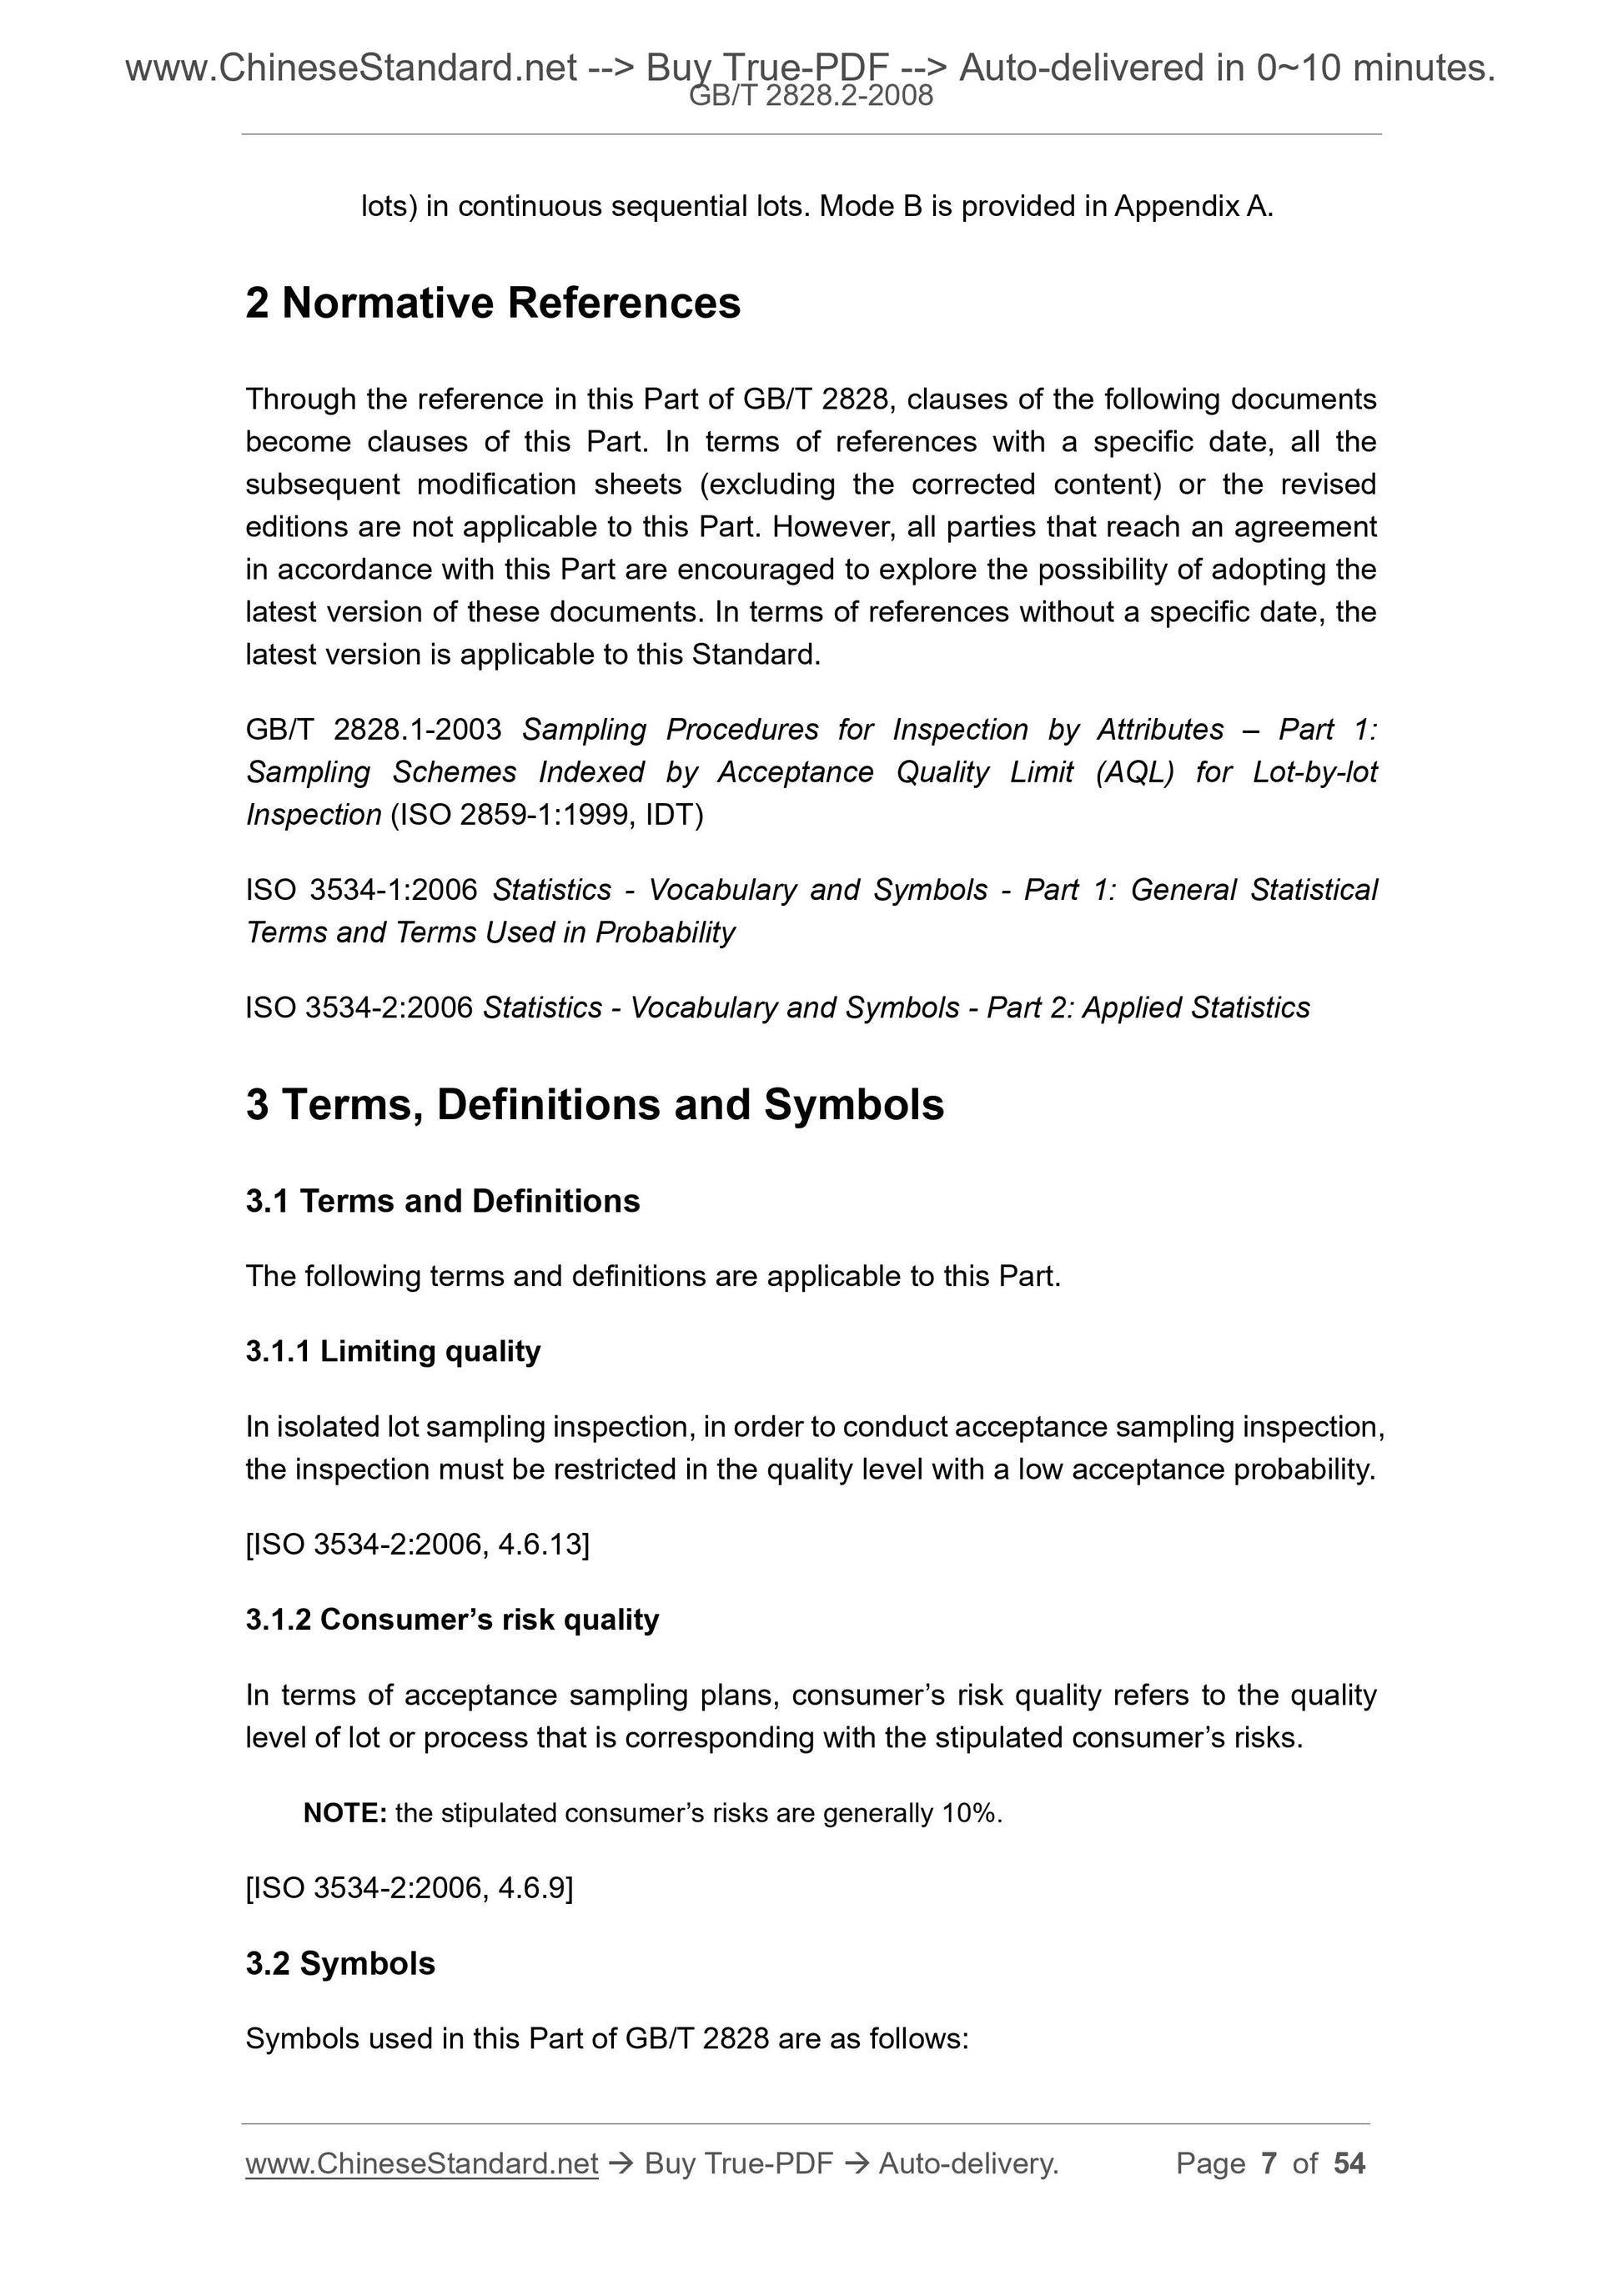 GB/T 2828.2-2008 Page 6